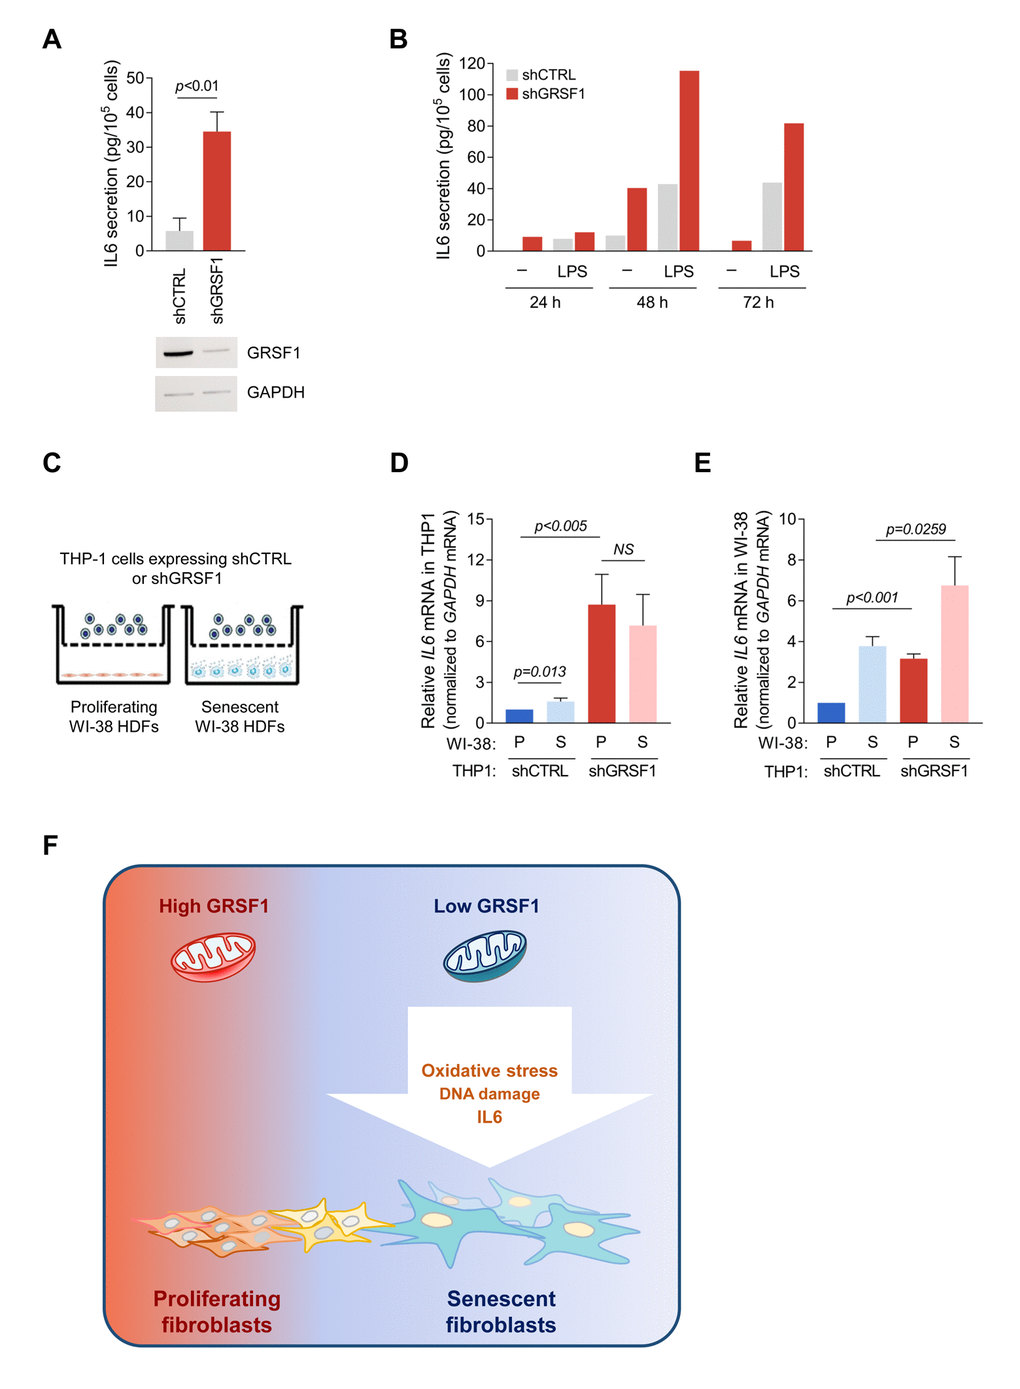 Loss of GRSF1 increases the paracrine actions of IL6. (A) THP-1 monocytes expressing lentiviral shGRSF1 or shCTRL were maintained in normal culture medium (containing 10% FBS), and the amount of IL6 secreted into the CM was measured by ELISA. (B) Human monocyte THP-1 cells were infected with shGRSF1 or shCTRL lentiviruses to produce different steady-state levels of GRSF1 constitutively. The levels of IL6 secretion by these cells was measured by ELISA; treatments with LPS (50 ng/mL) for 24, 48, and 72 h were included as positive controls for IL6 production. (C-E) Schematic of the co-culture setup. Proliferating (PDL20-25) or senescent (PDL55-60) WI-38 fibroblasts were plated in the lower chamber, and THP-1 cells constitutively expressing different levels of GRSF1, as explained in (A), were plated in the upper chamber. The chambers were separated by a selectively permeable membrane with 0.4 µm-diameter pores (C). Lentiviral shRNA-expressing THP-1 cells were co-cultured with either proliferating or senescent WI-38 fibroblasts for 48 h, and the levels of IL6 mRNA in THP-1 cells (D) and WI-38 cells (E) were quantified by RT-qPCR analysis. Data in A,D,E represent the means ±S.D. from three independent experiments. (F) Model: we propose that loss of GRSF1 contributes to cellular senescence characterized by oxidative stress, DNA damage, growth suppression, and IL6 production.